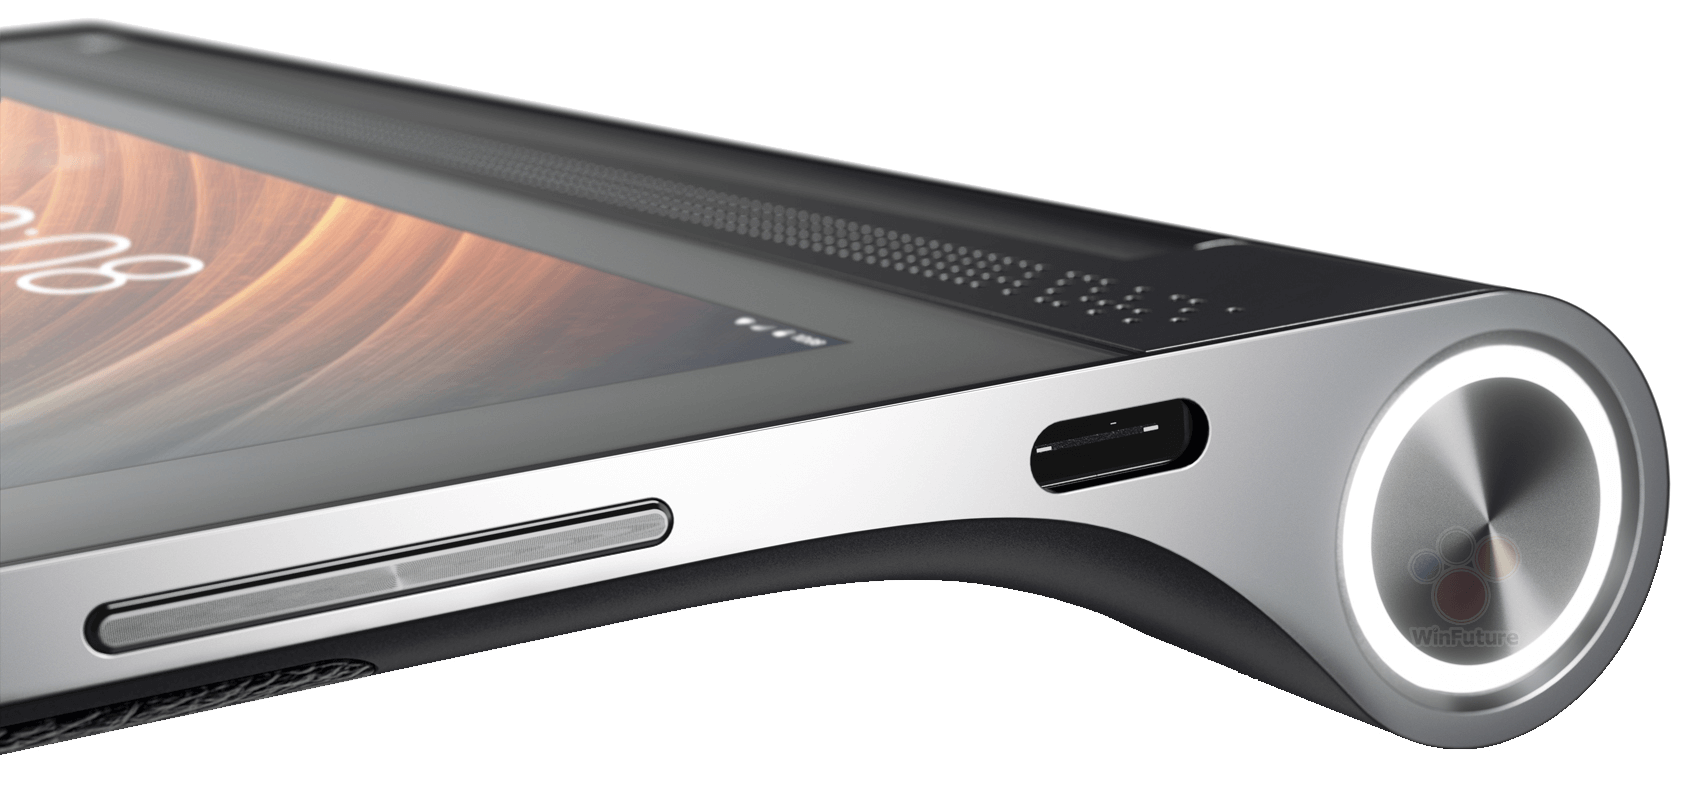 The Lenovo Yoga Tab 13 is on the way in 2021, according to new